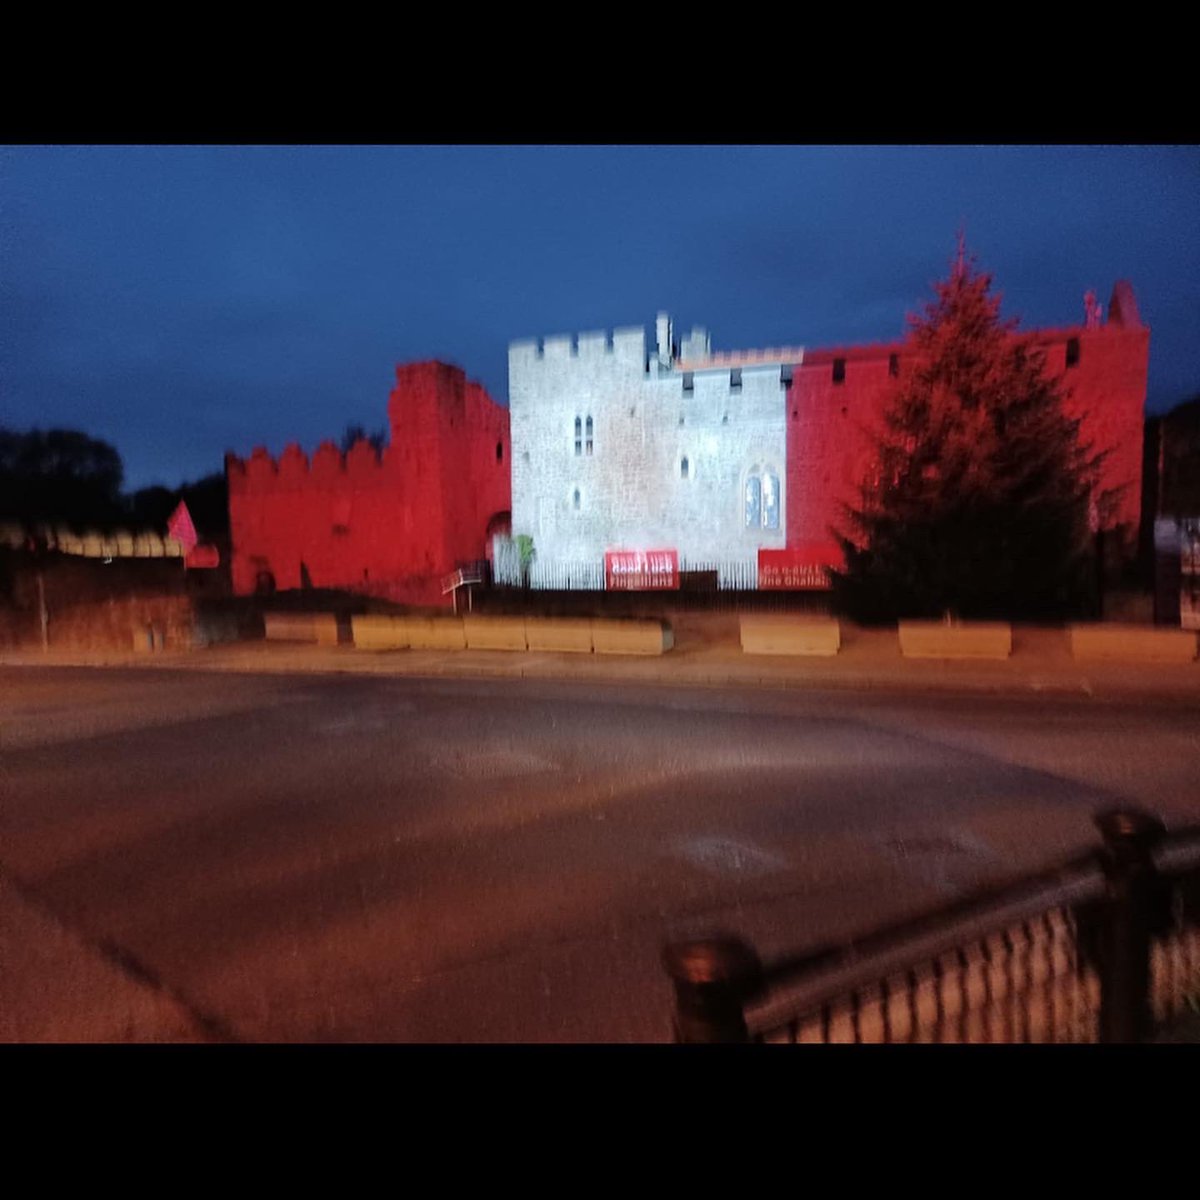 Swords Castle lit up in the Red and White of Fins to support our Hurlers in the County Final on Sunday. Fins Abú 🟥◻️🟥◻️
#fingallians #hurling #swords #rubyspizzaandgrill #swordscastle